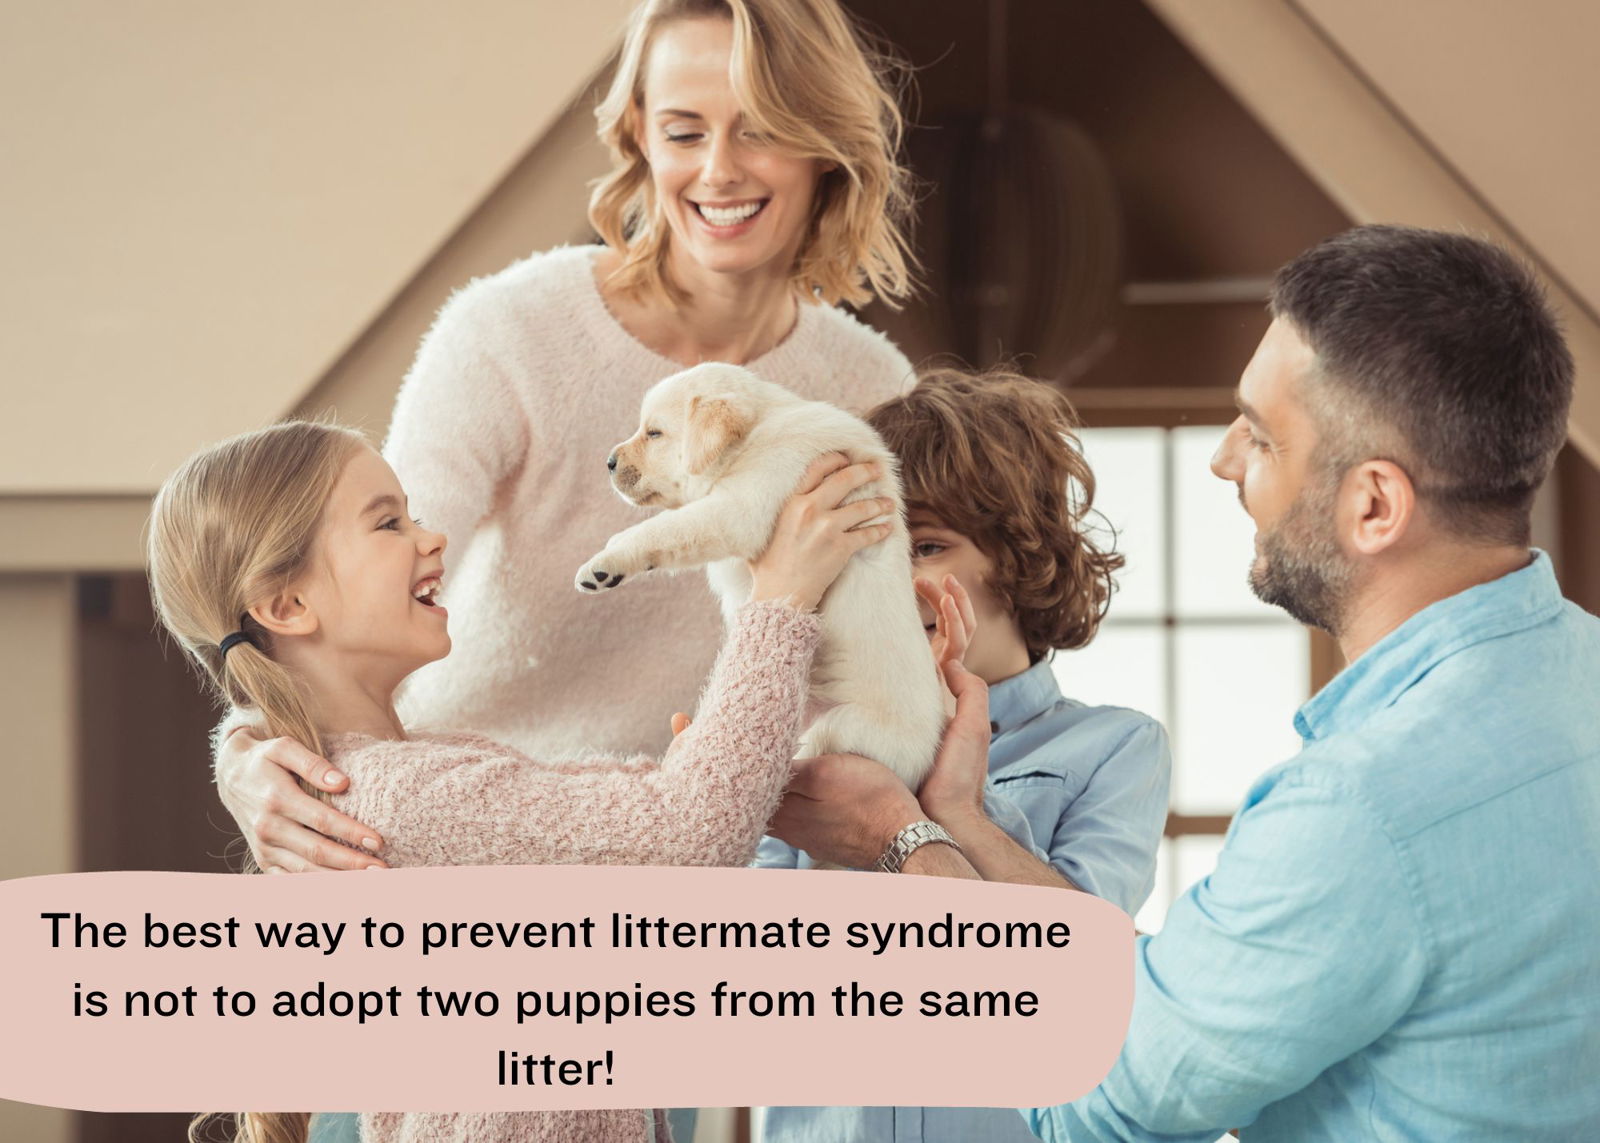 Prevent littermate syndrome by not adopting two puppies from the same litter